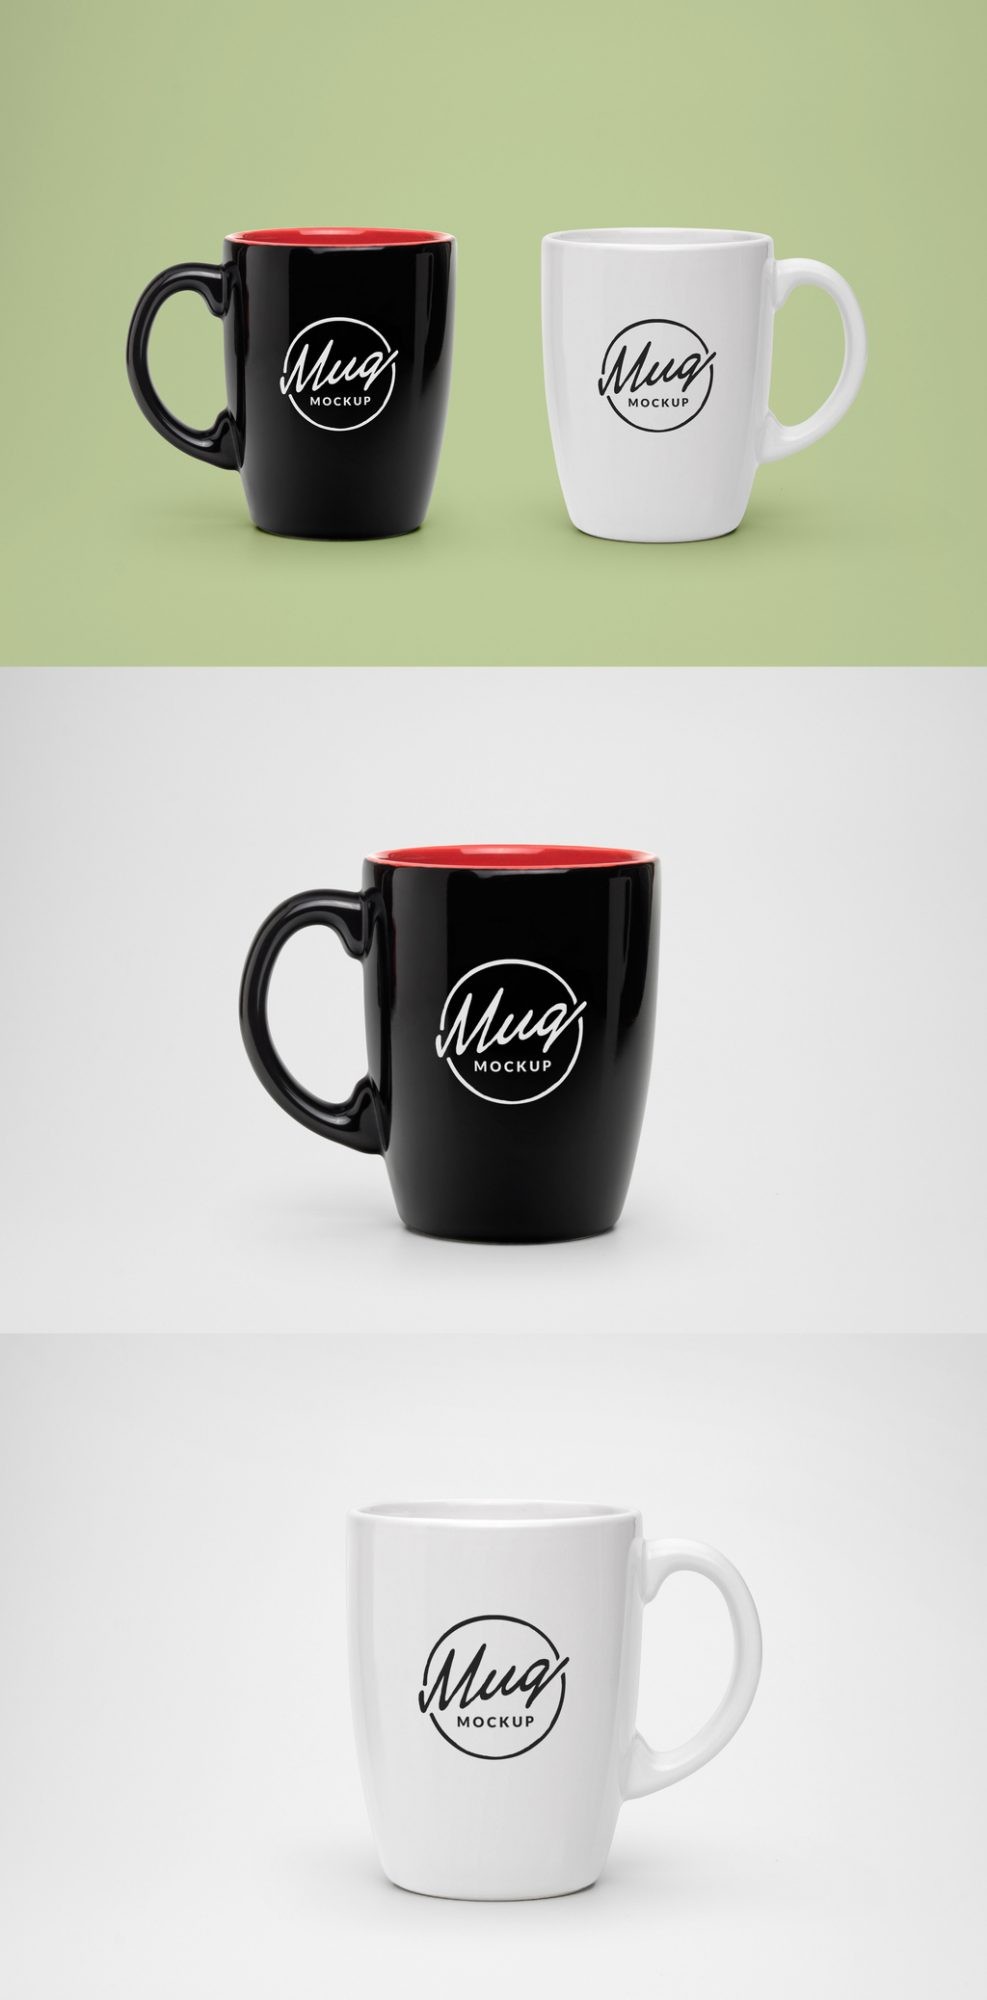 A white ceramic coffee mug with a handle, sitting on a solid colored surface, ready for branding designs to be added via smart objects in Photoshop.